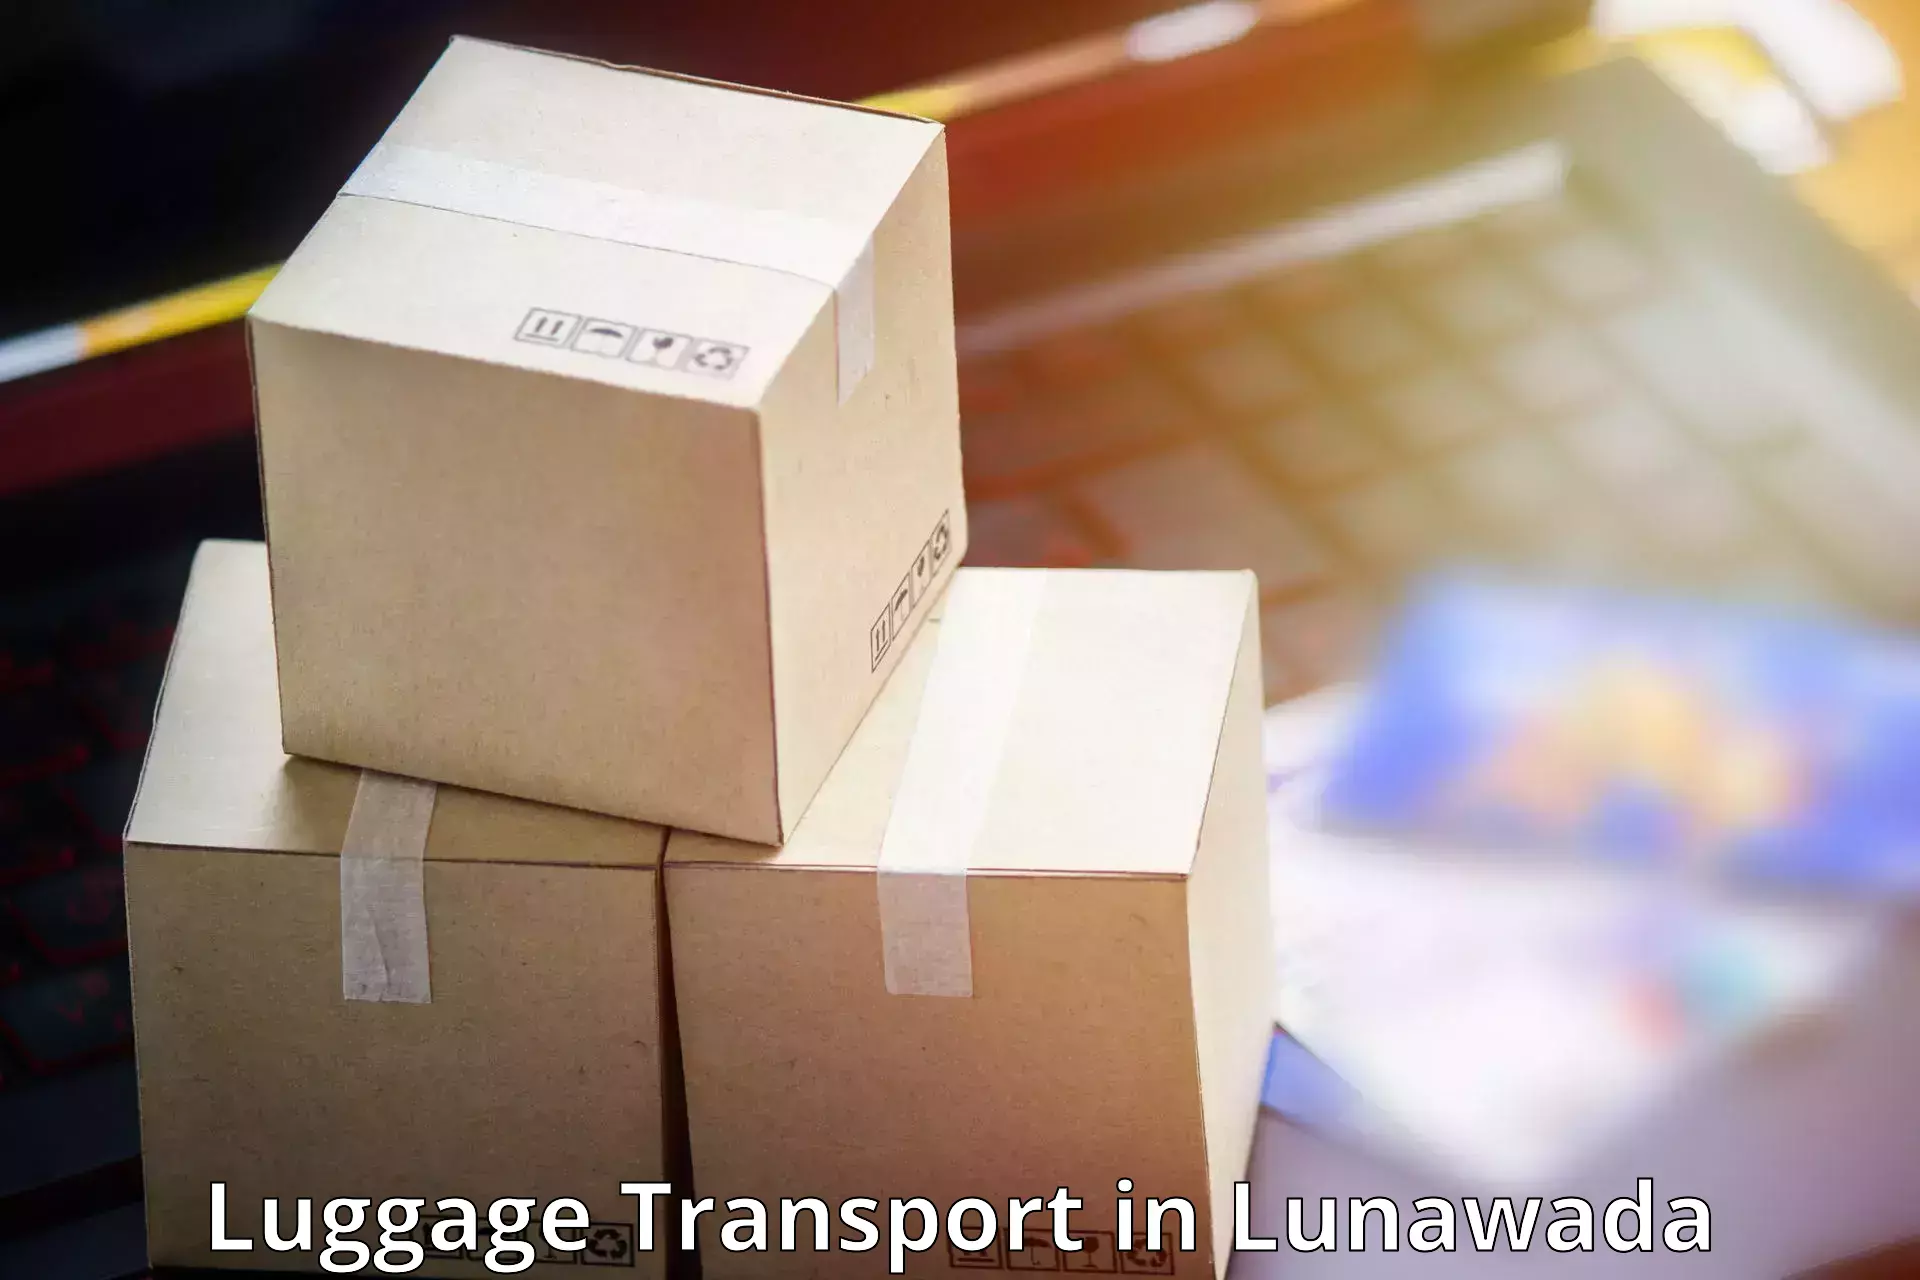 Luggage delivery operations in Lunawada